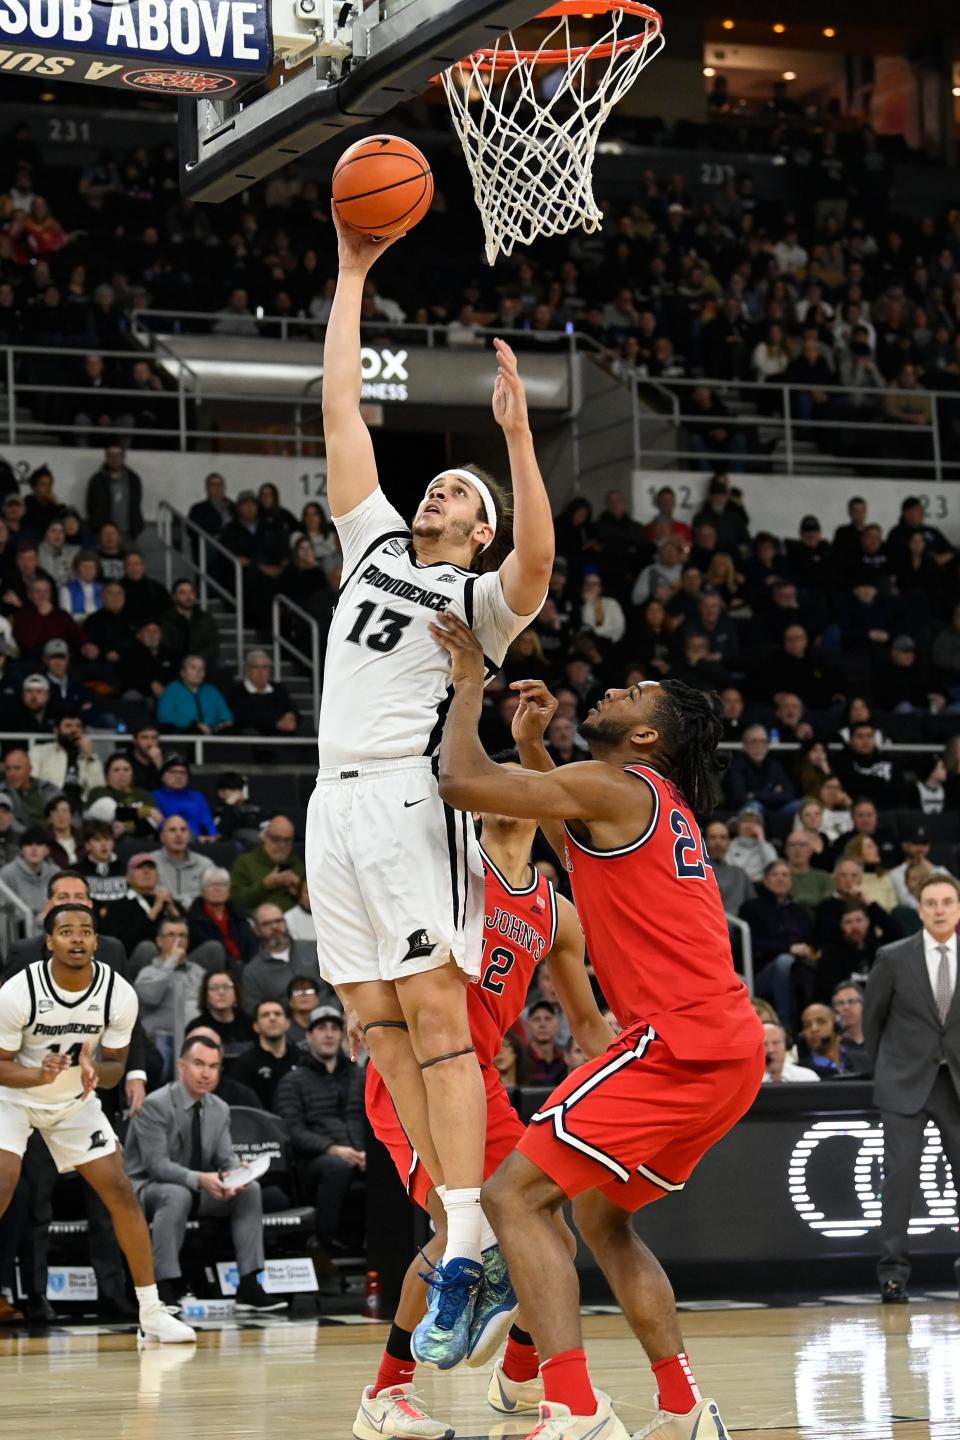 Providence Friars forward Josh Oduro goes to the basket against St. John's during the first half.